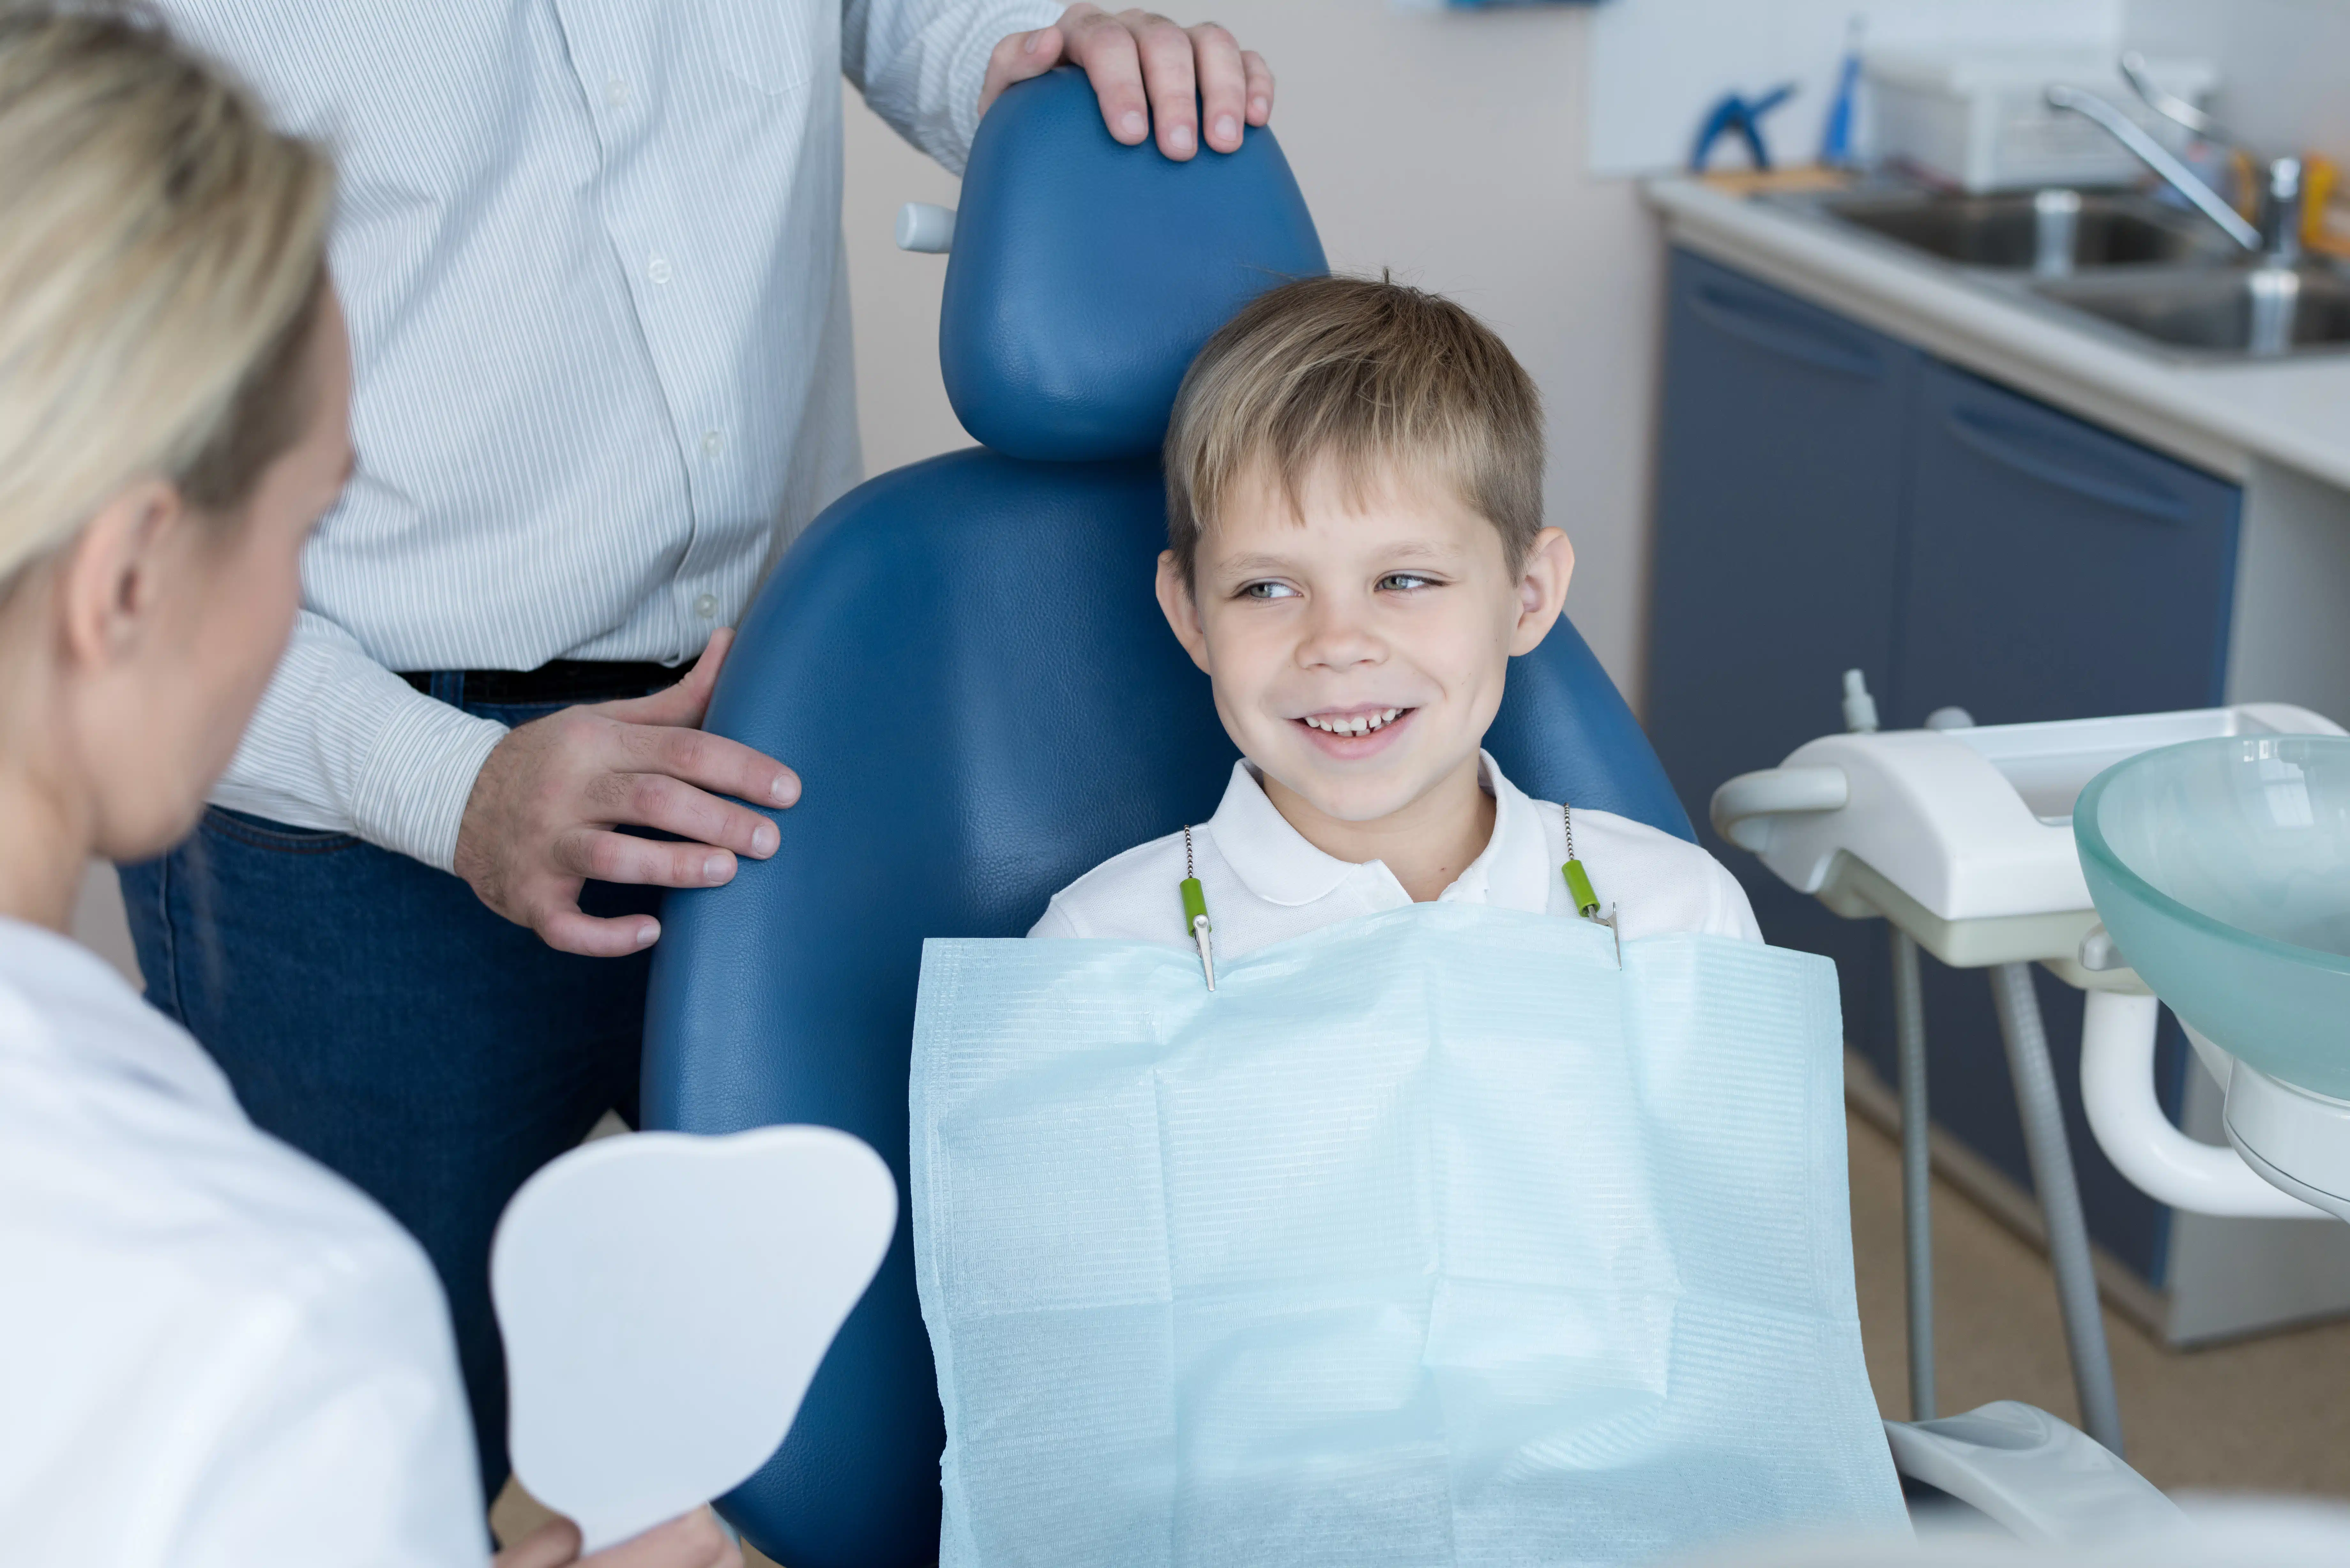 Dental sedation is a safe and effective way to help your child feel more relaxed during their dental appointment.